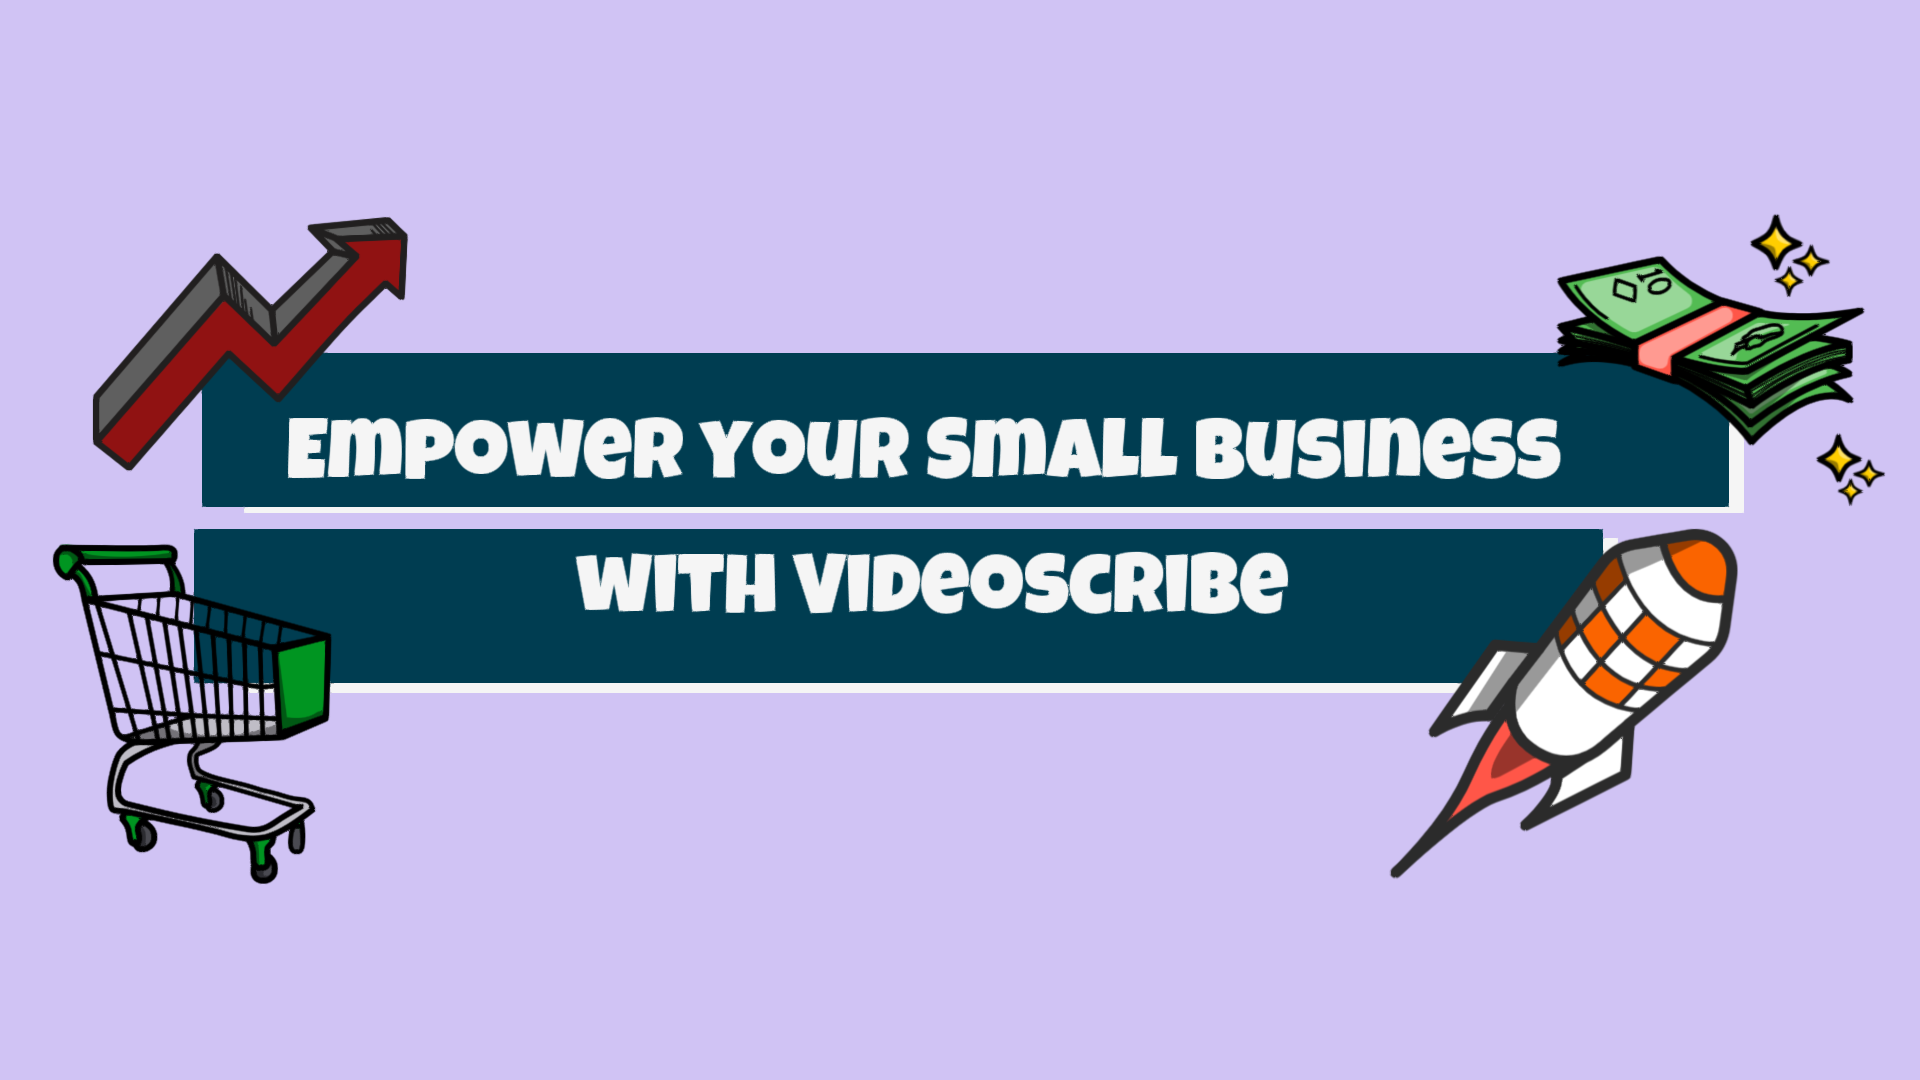 Empower your Small Business with Videoscribe